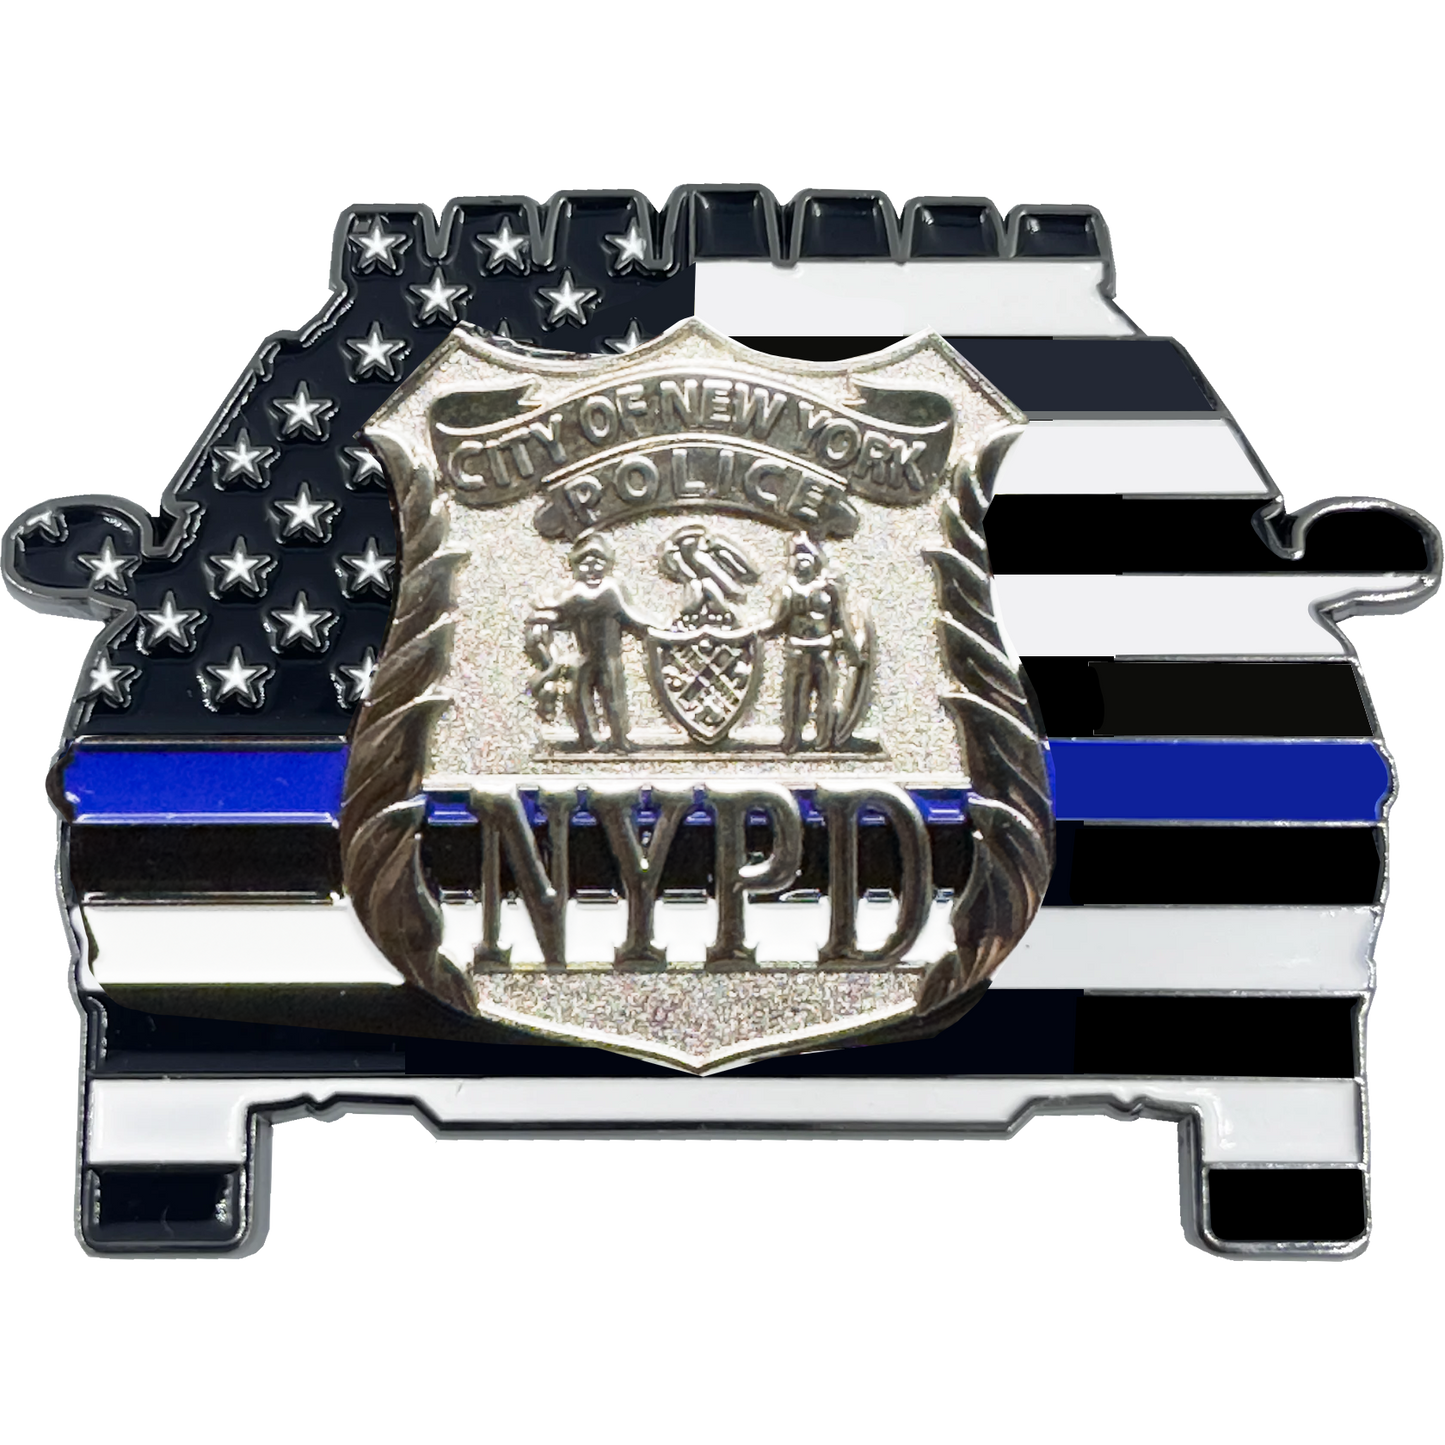 EL14-009 New York Police Department See You next Tuesday DeBlasio Challenge Coin Police Thin Blue Line